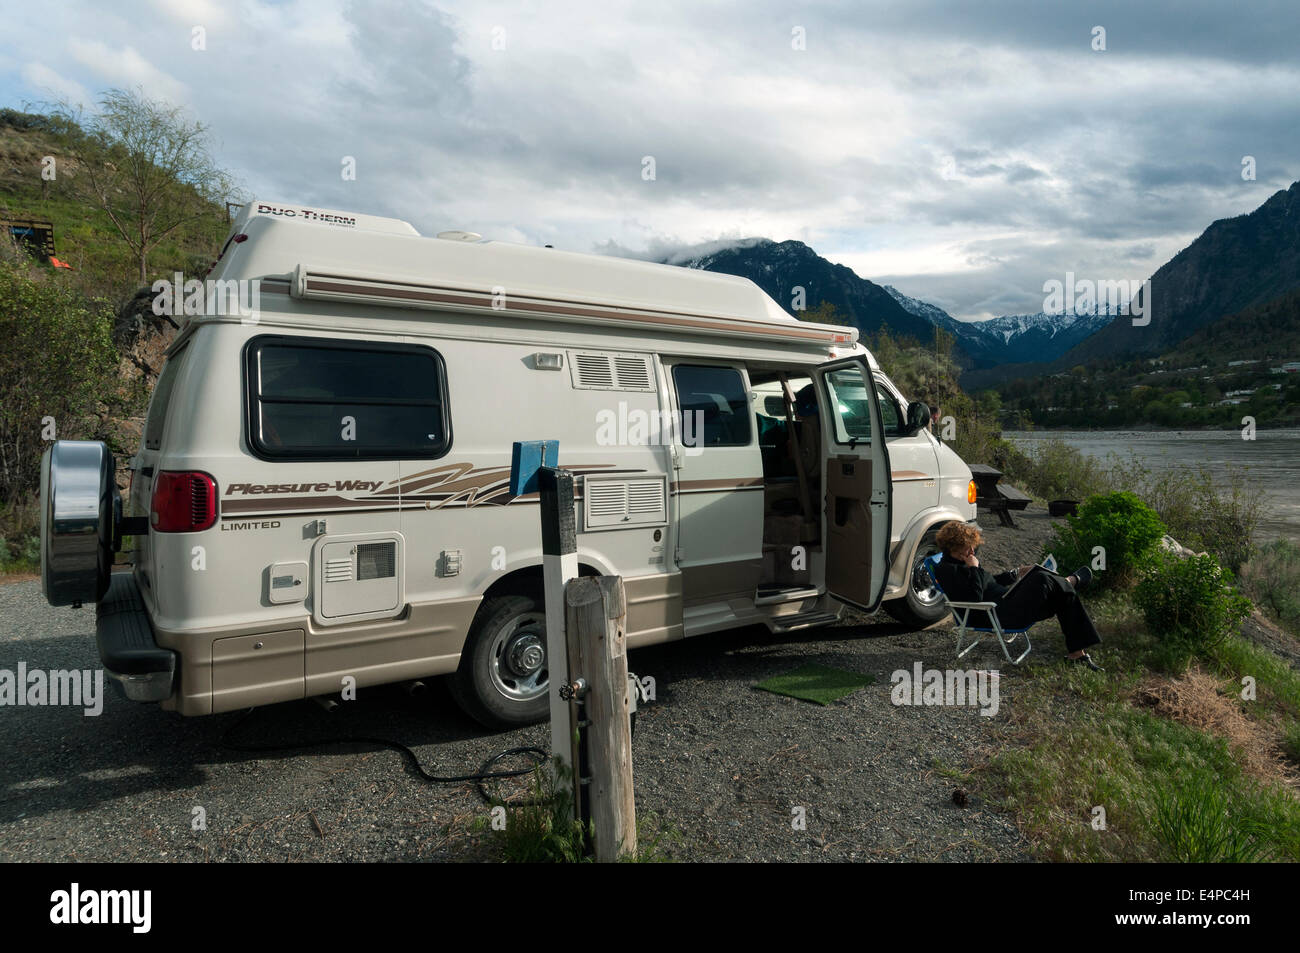 Elk203-3020 Canada, British Columbia, Lillooet, Fraser River and RV in campground Stock Photo